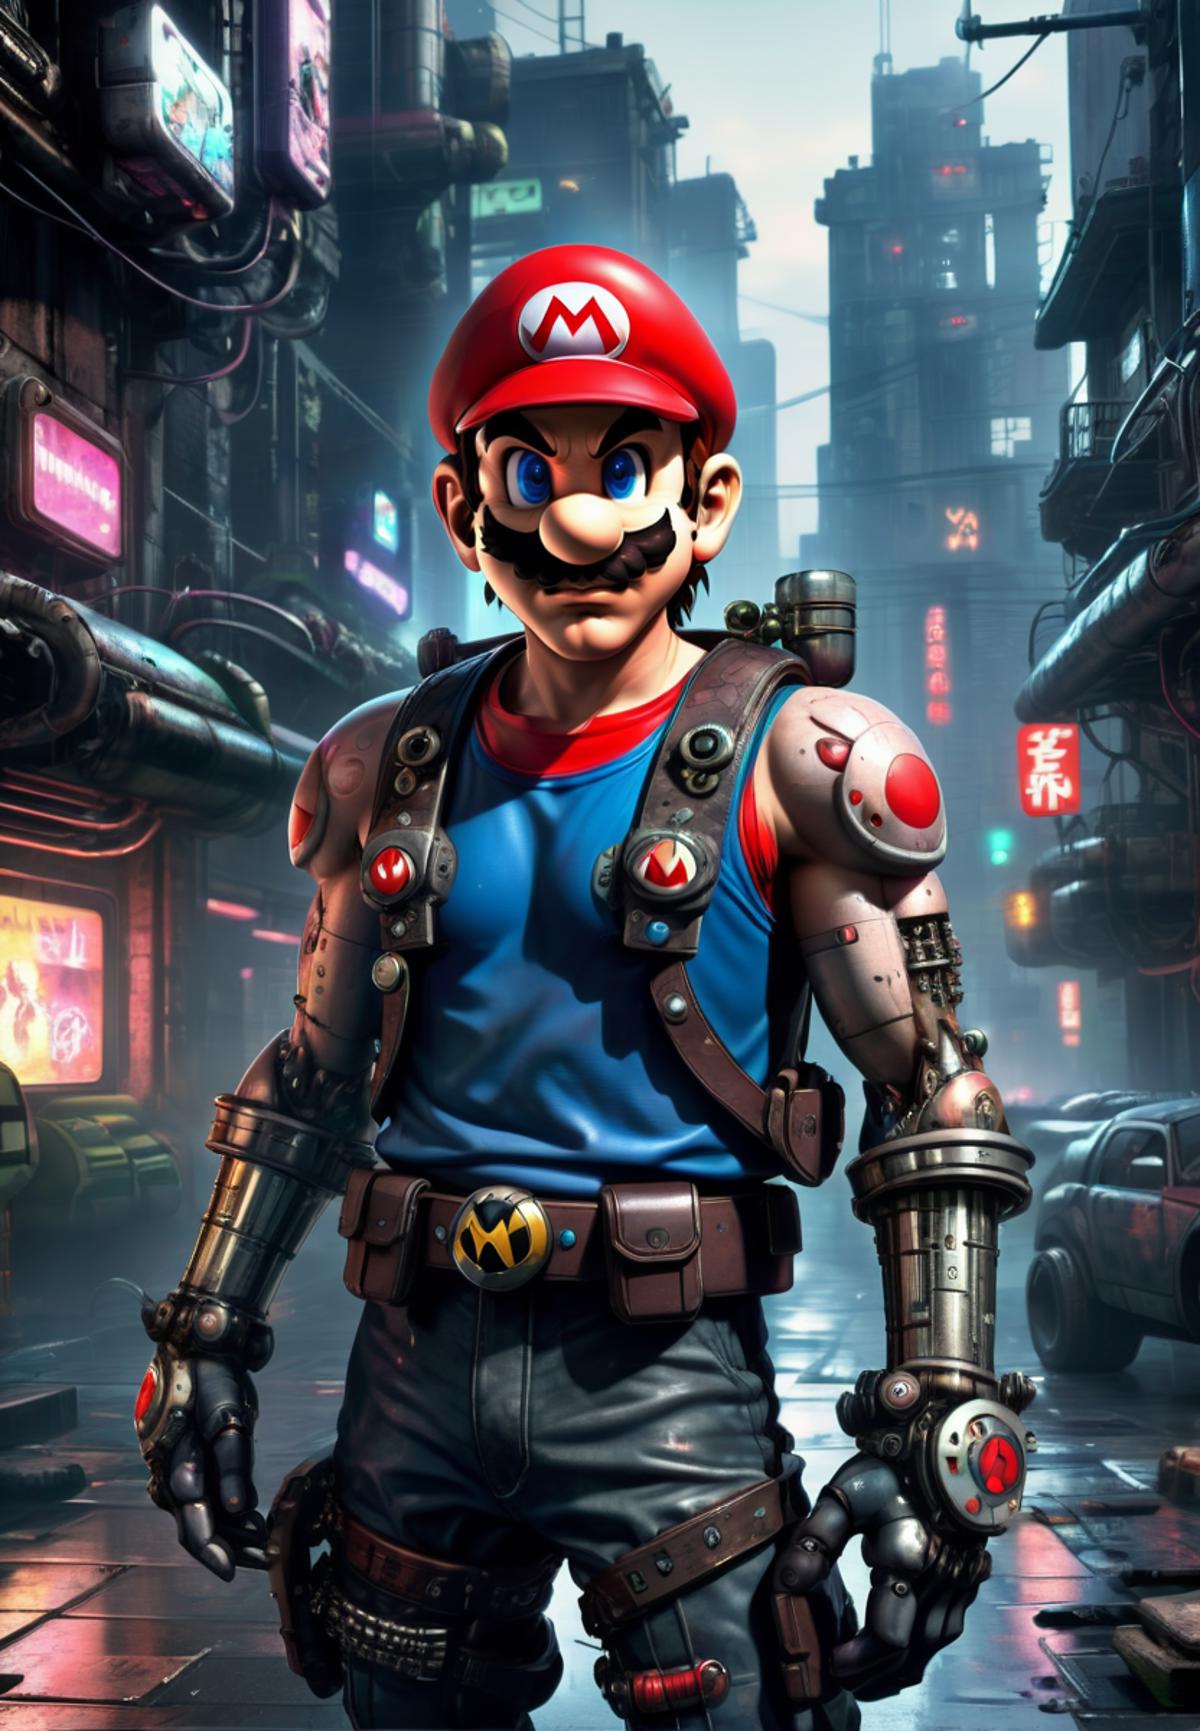 A robotic Mario character with a red hat and blue shirt.